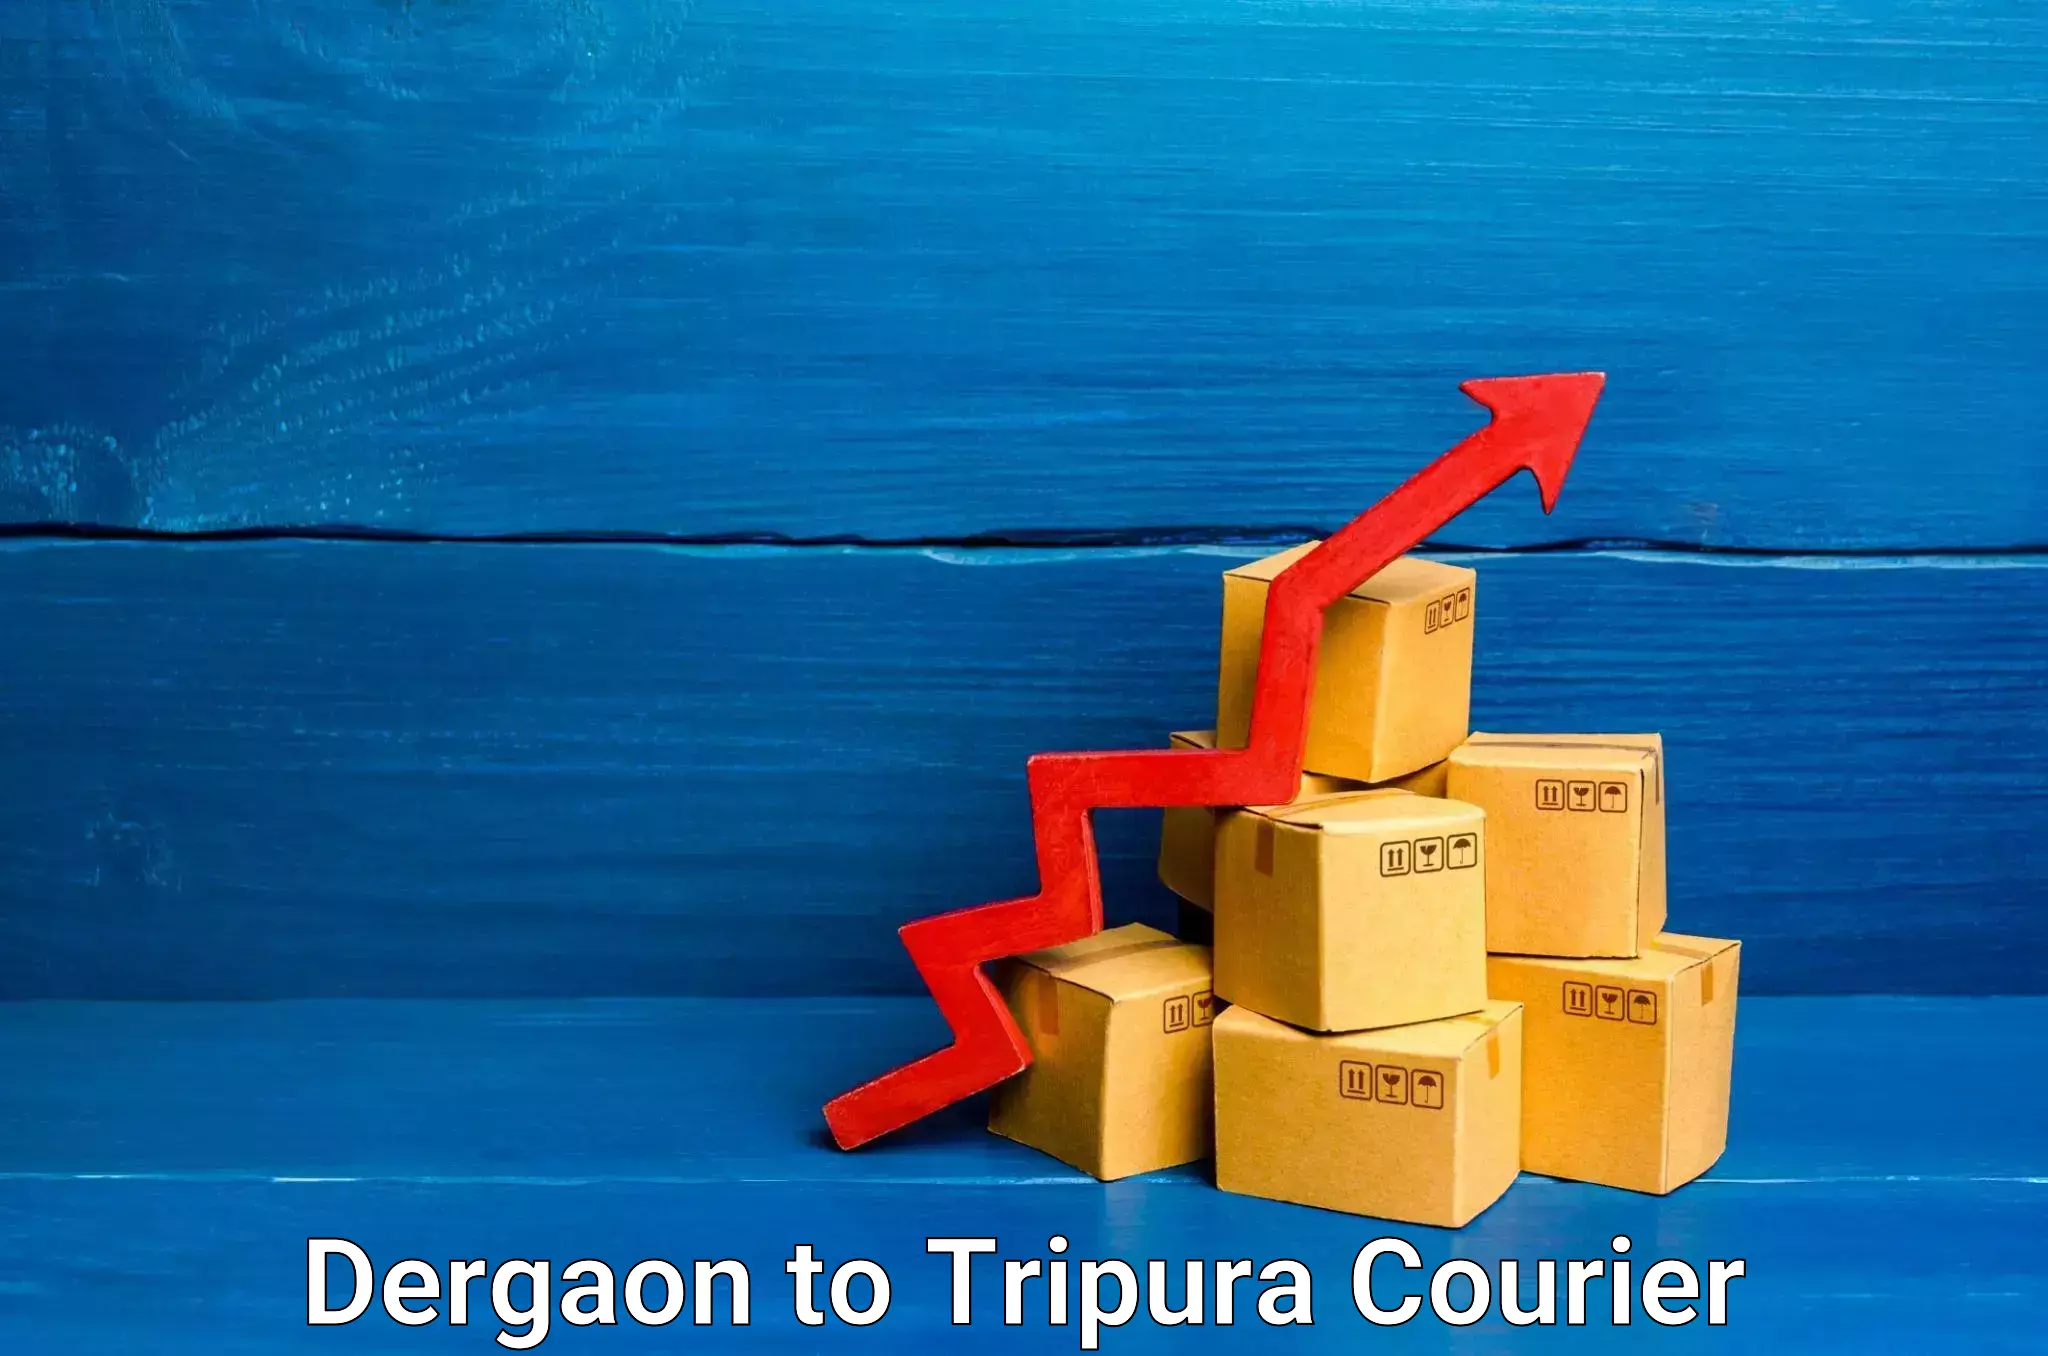 Multi-national courier services Dergaon to Udaipur Tripura